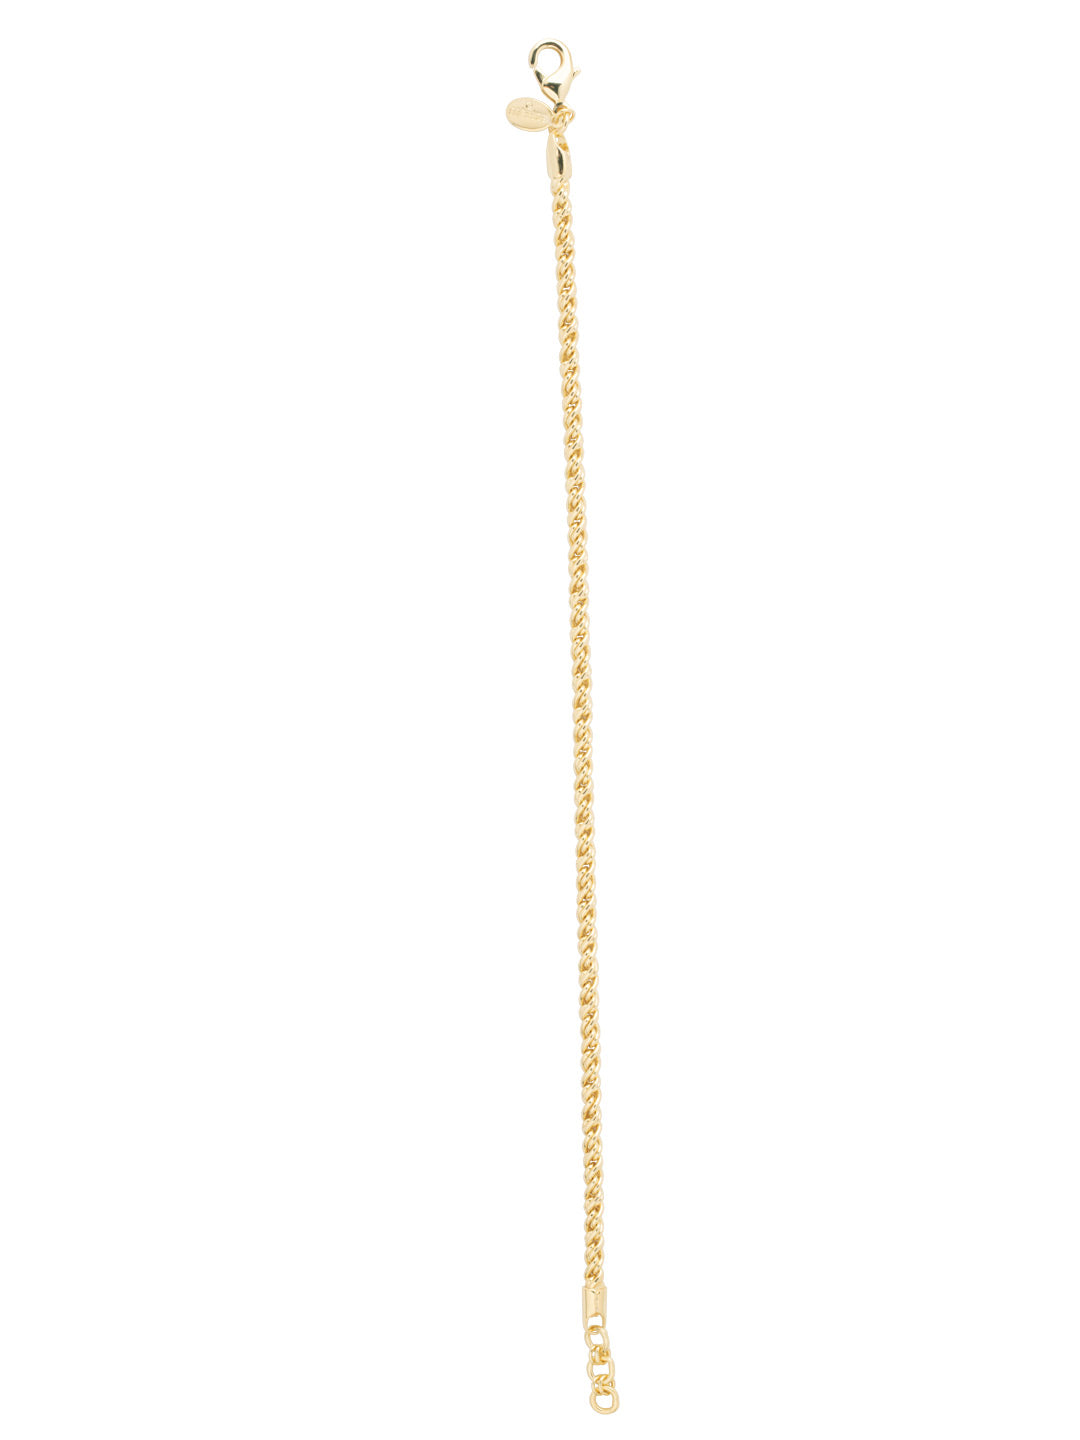 Rope Chain Anklet - AFM1BGMTL - <p>The Rope Chain Anklet features an adjustable rope chain secured with a lobster claw clasp. From Sorrelli's Bare Metallic collection in our Bright Gold-tone finish.</p>